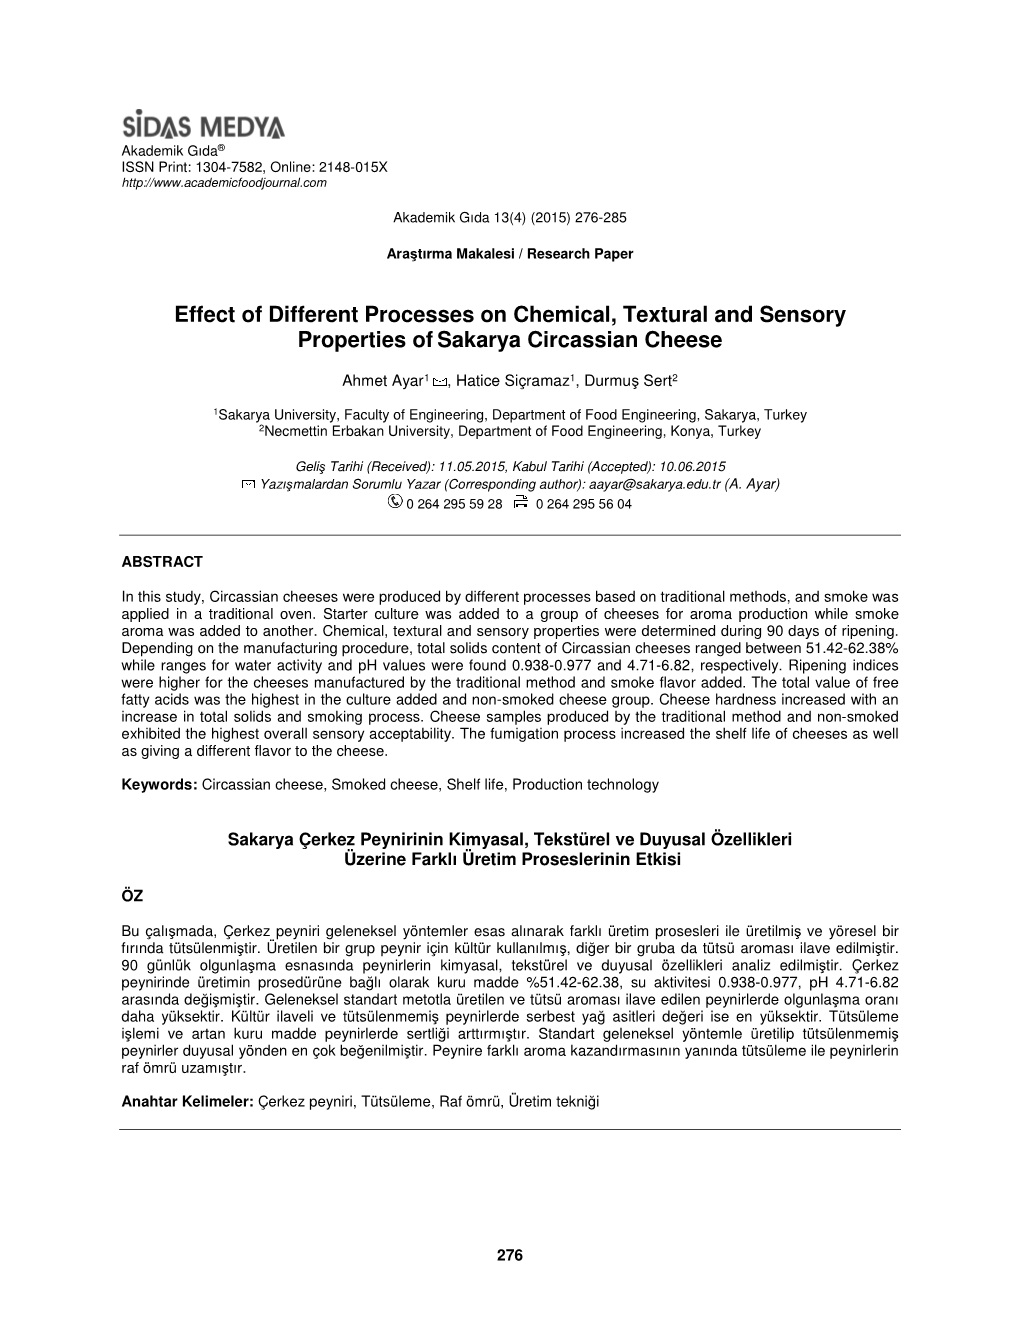 Effect of Different Processes on Chemical, Textural and Sensory Properties of Sakarya Circassian Cheese